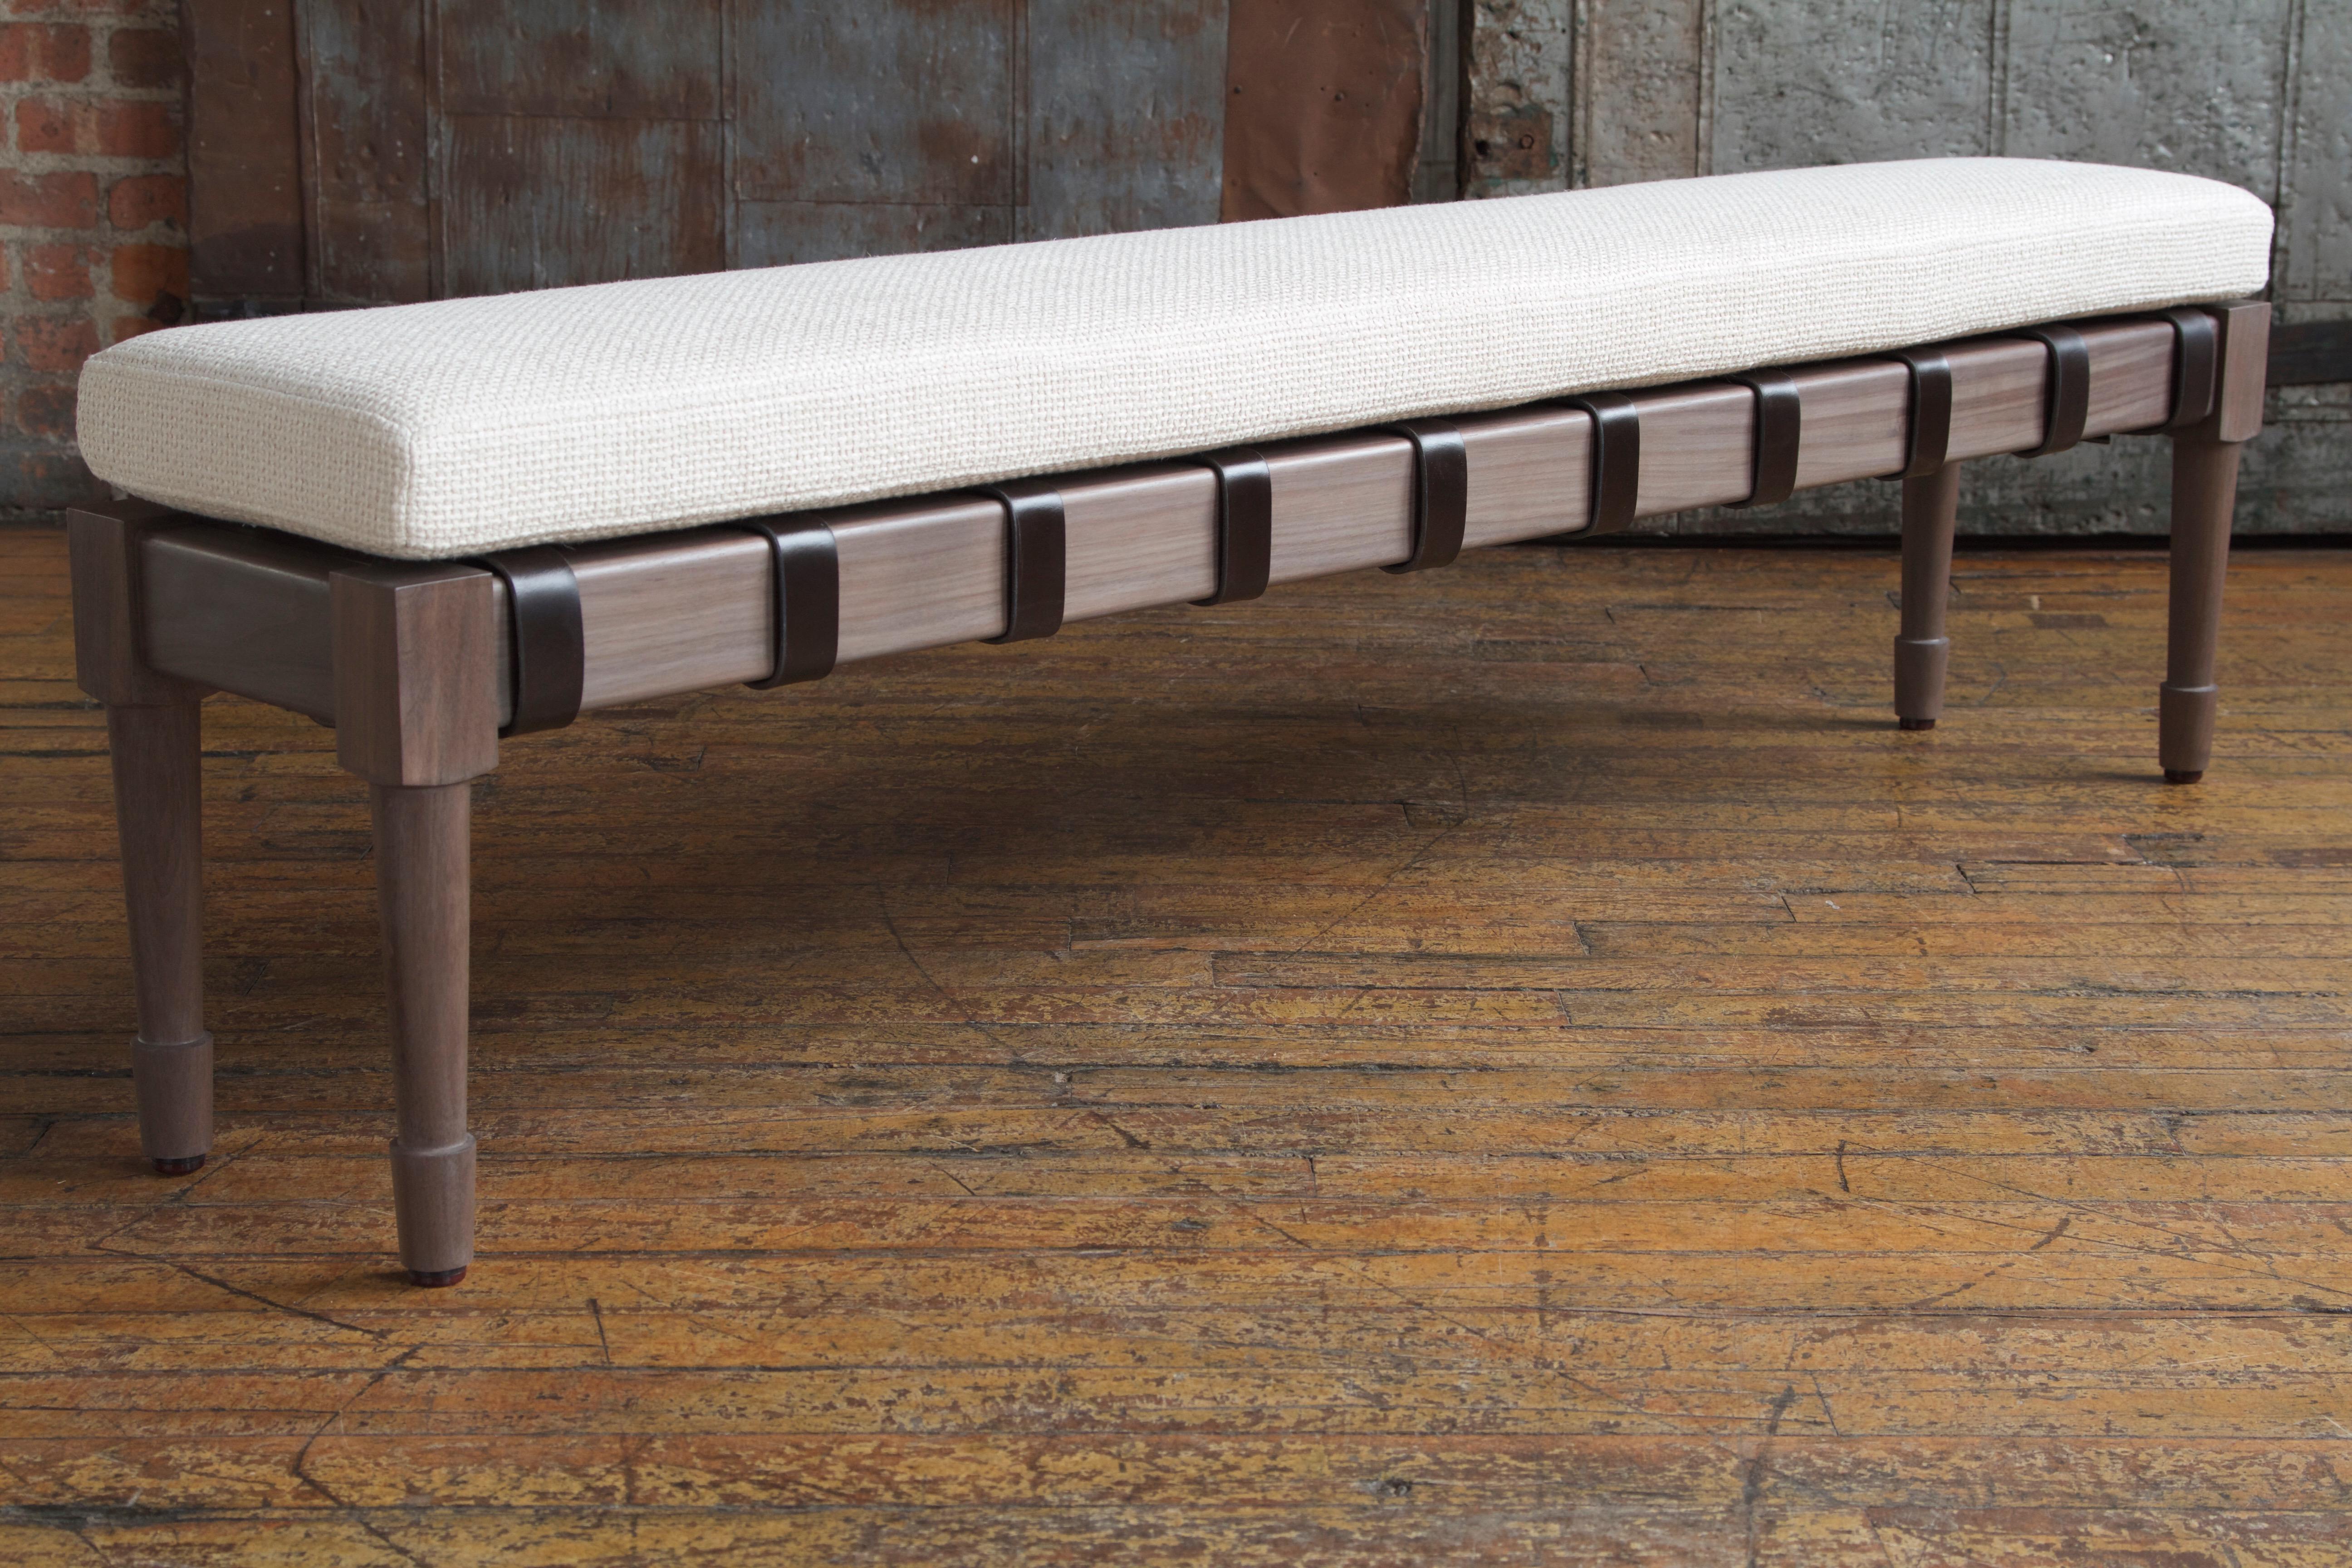 The Jasper bench in silver grey walnut with Perennials: Tisket Tasket / Sea Salt upholstery and dark chocolate English bridle strapping leather.

The modern campaign collection by Richard Wrightman combines the vernacular of traditional form with a